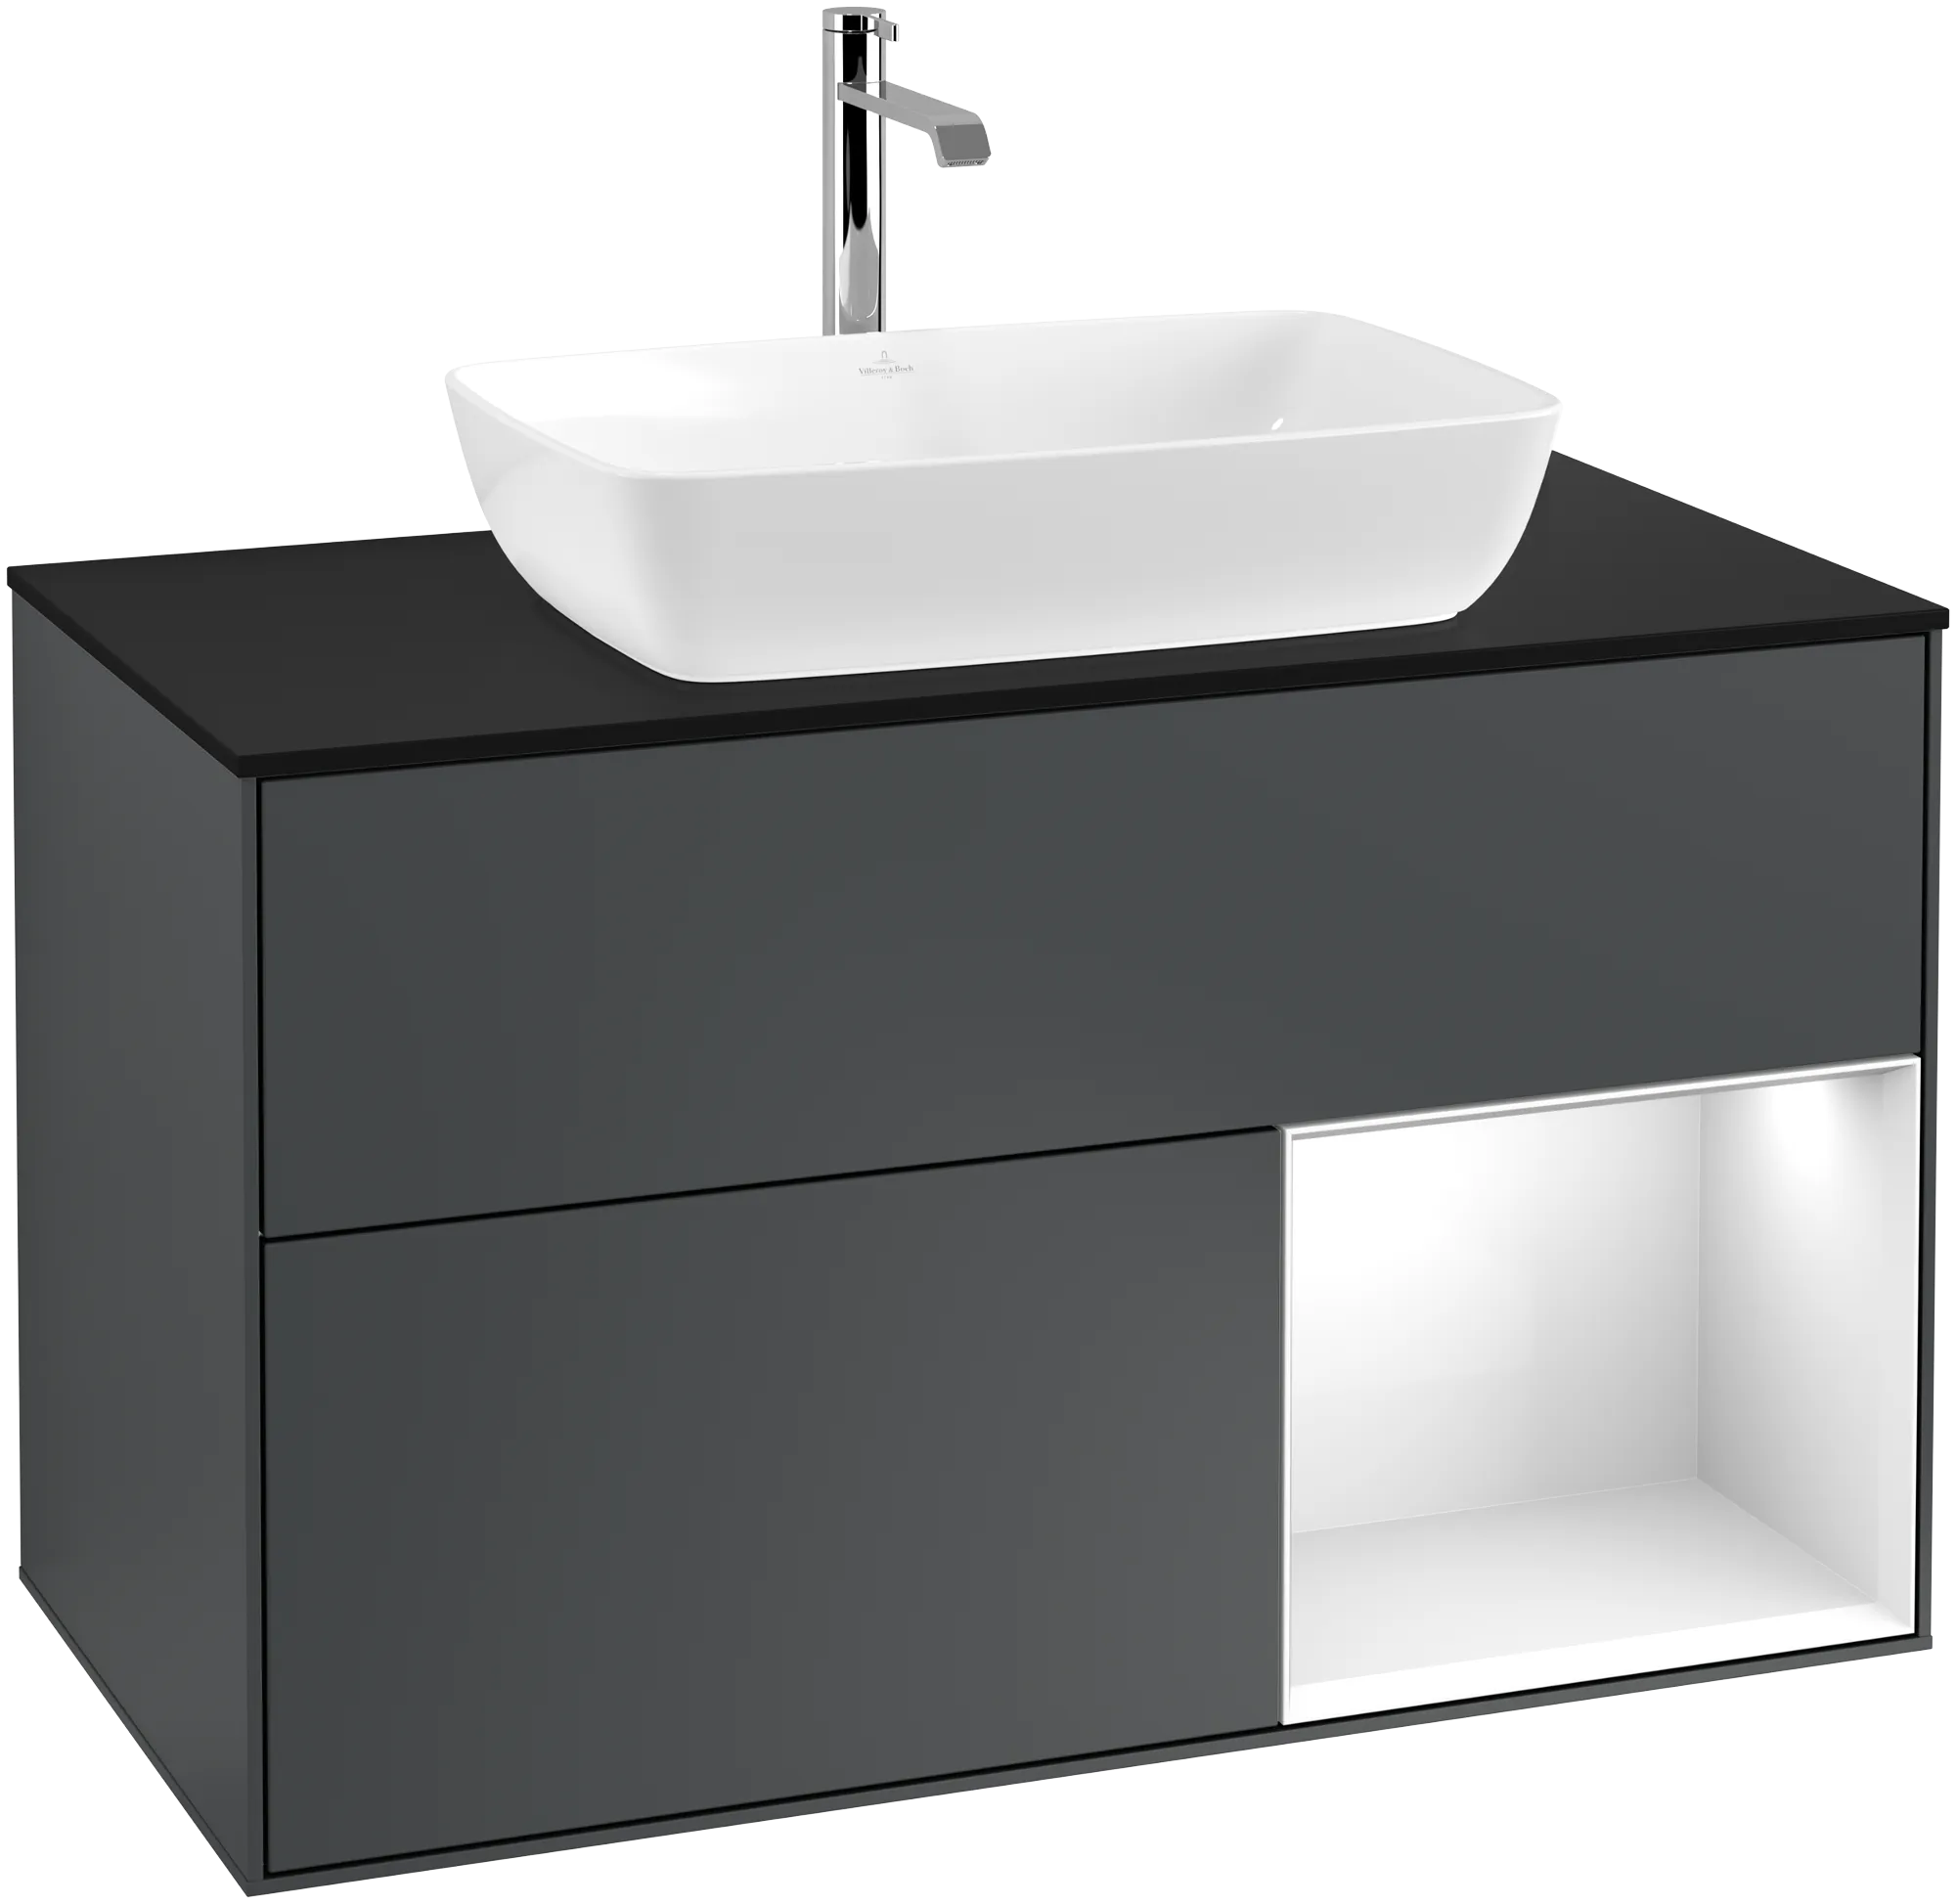 Picture of VILLEROY BOCH Finion Vanity unit, with lighting, 2 pull-out compartments, 1000 x 603 x 501 mm, Midnight Blue Matt Lacquer / Glossy White Lacquer / Glass Black Matt #G782GFHG